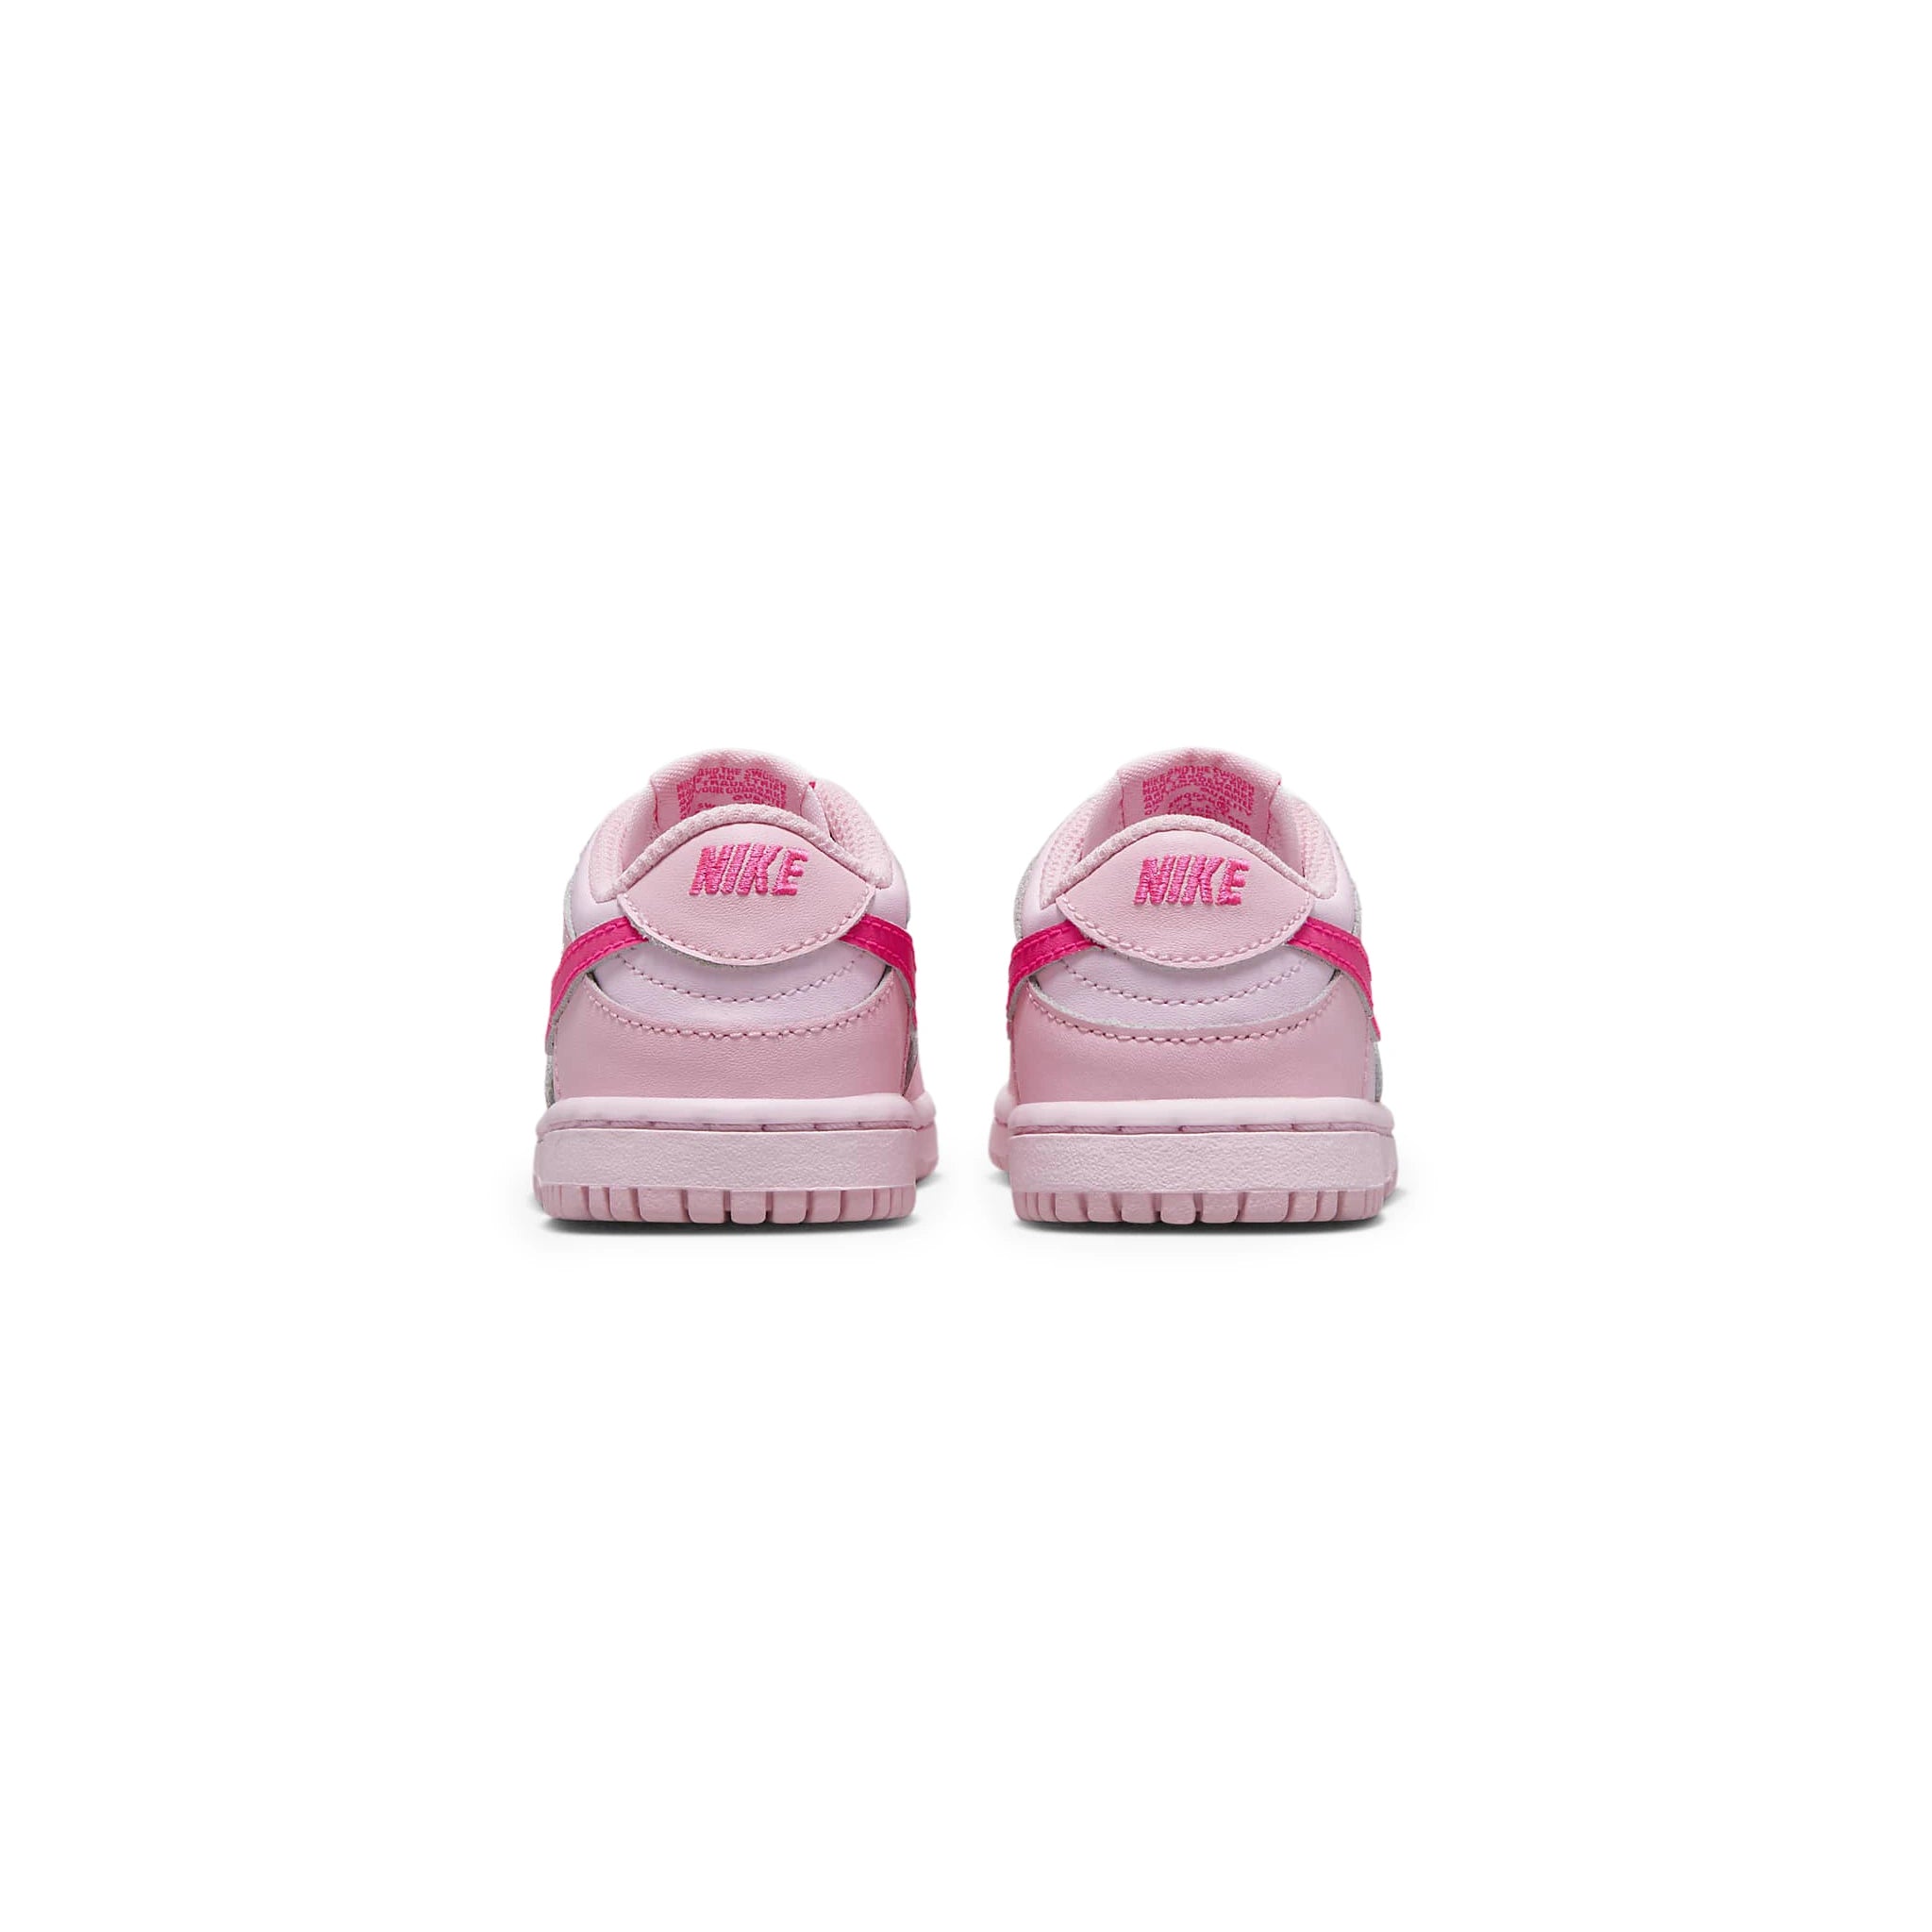 Back view of Nike Dunk Low Triple Pink (TD) DH9761-600